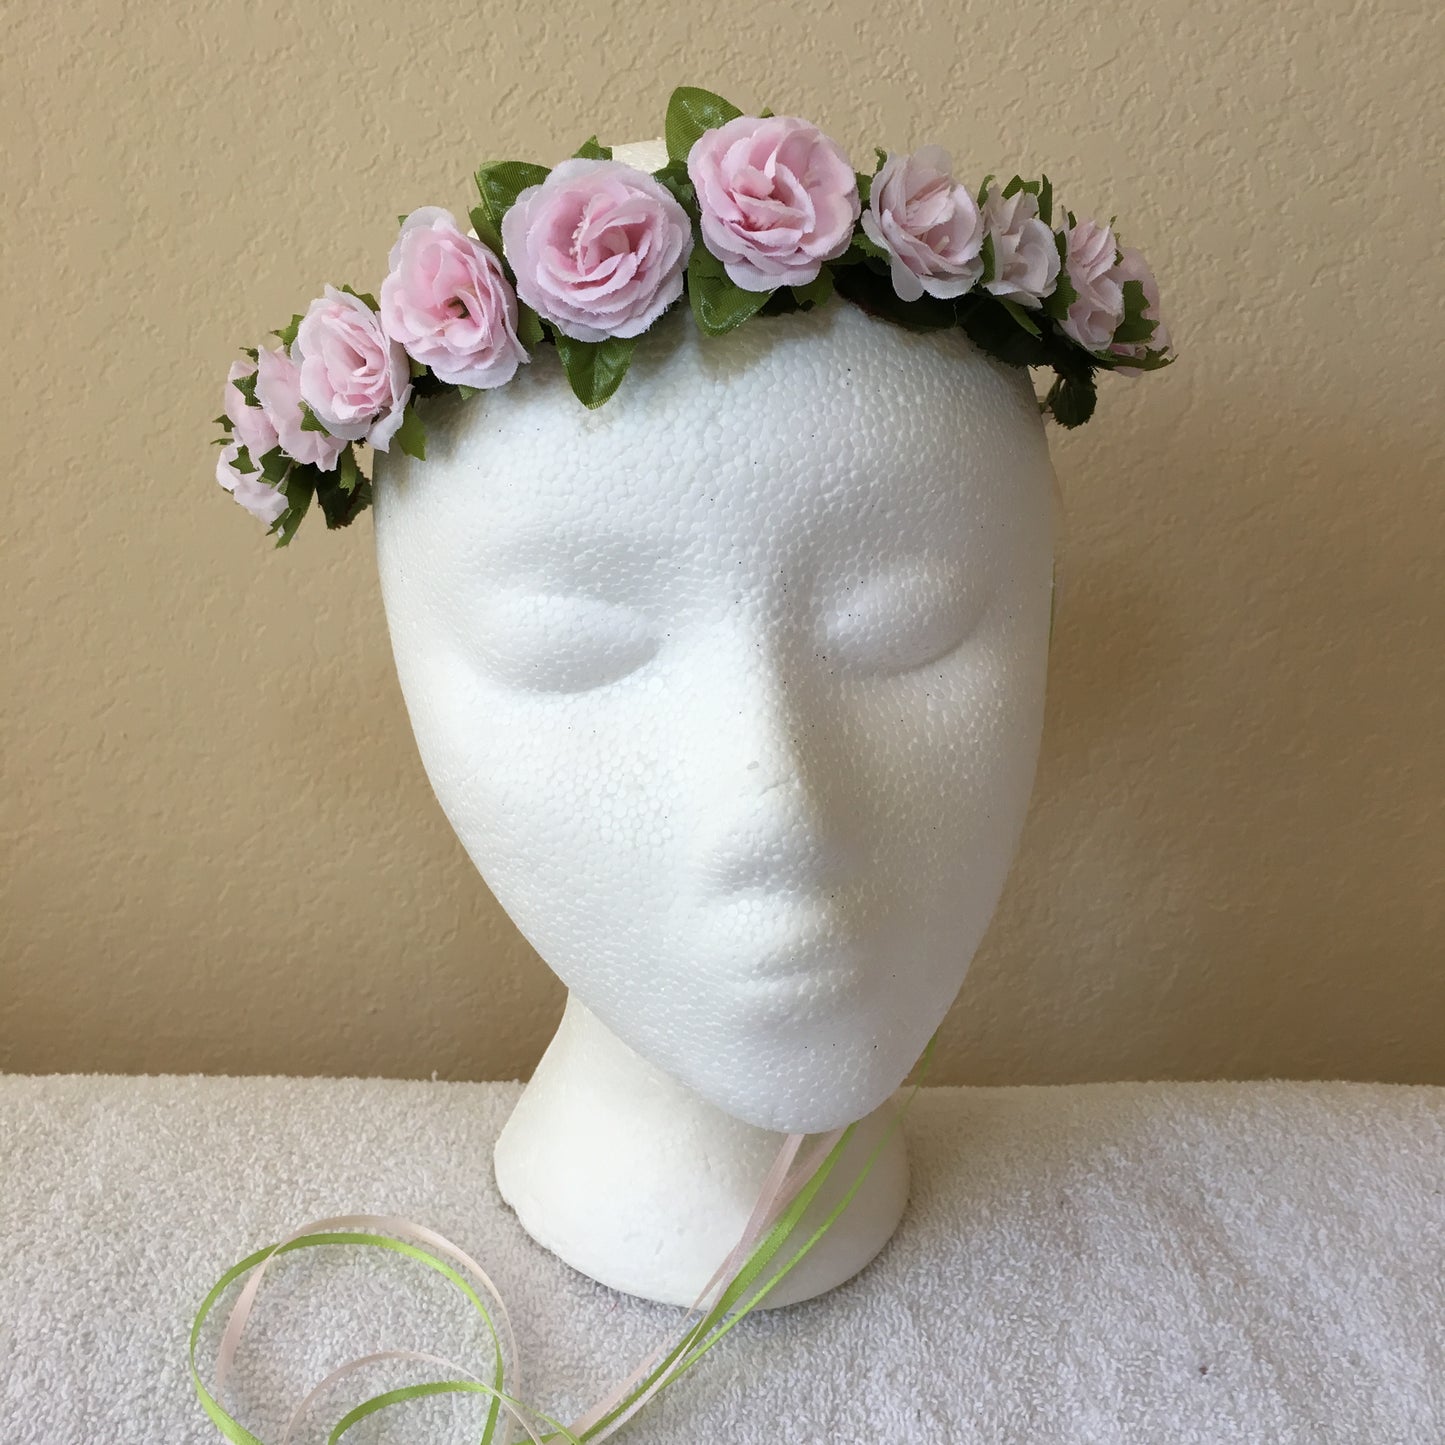 Extra Small Wreath - Light pink roses